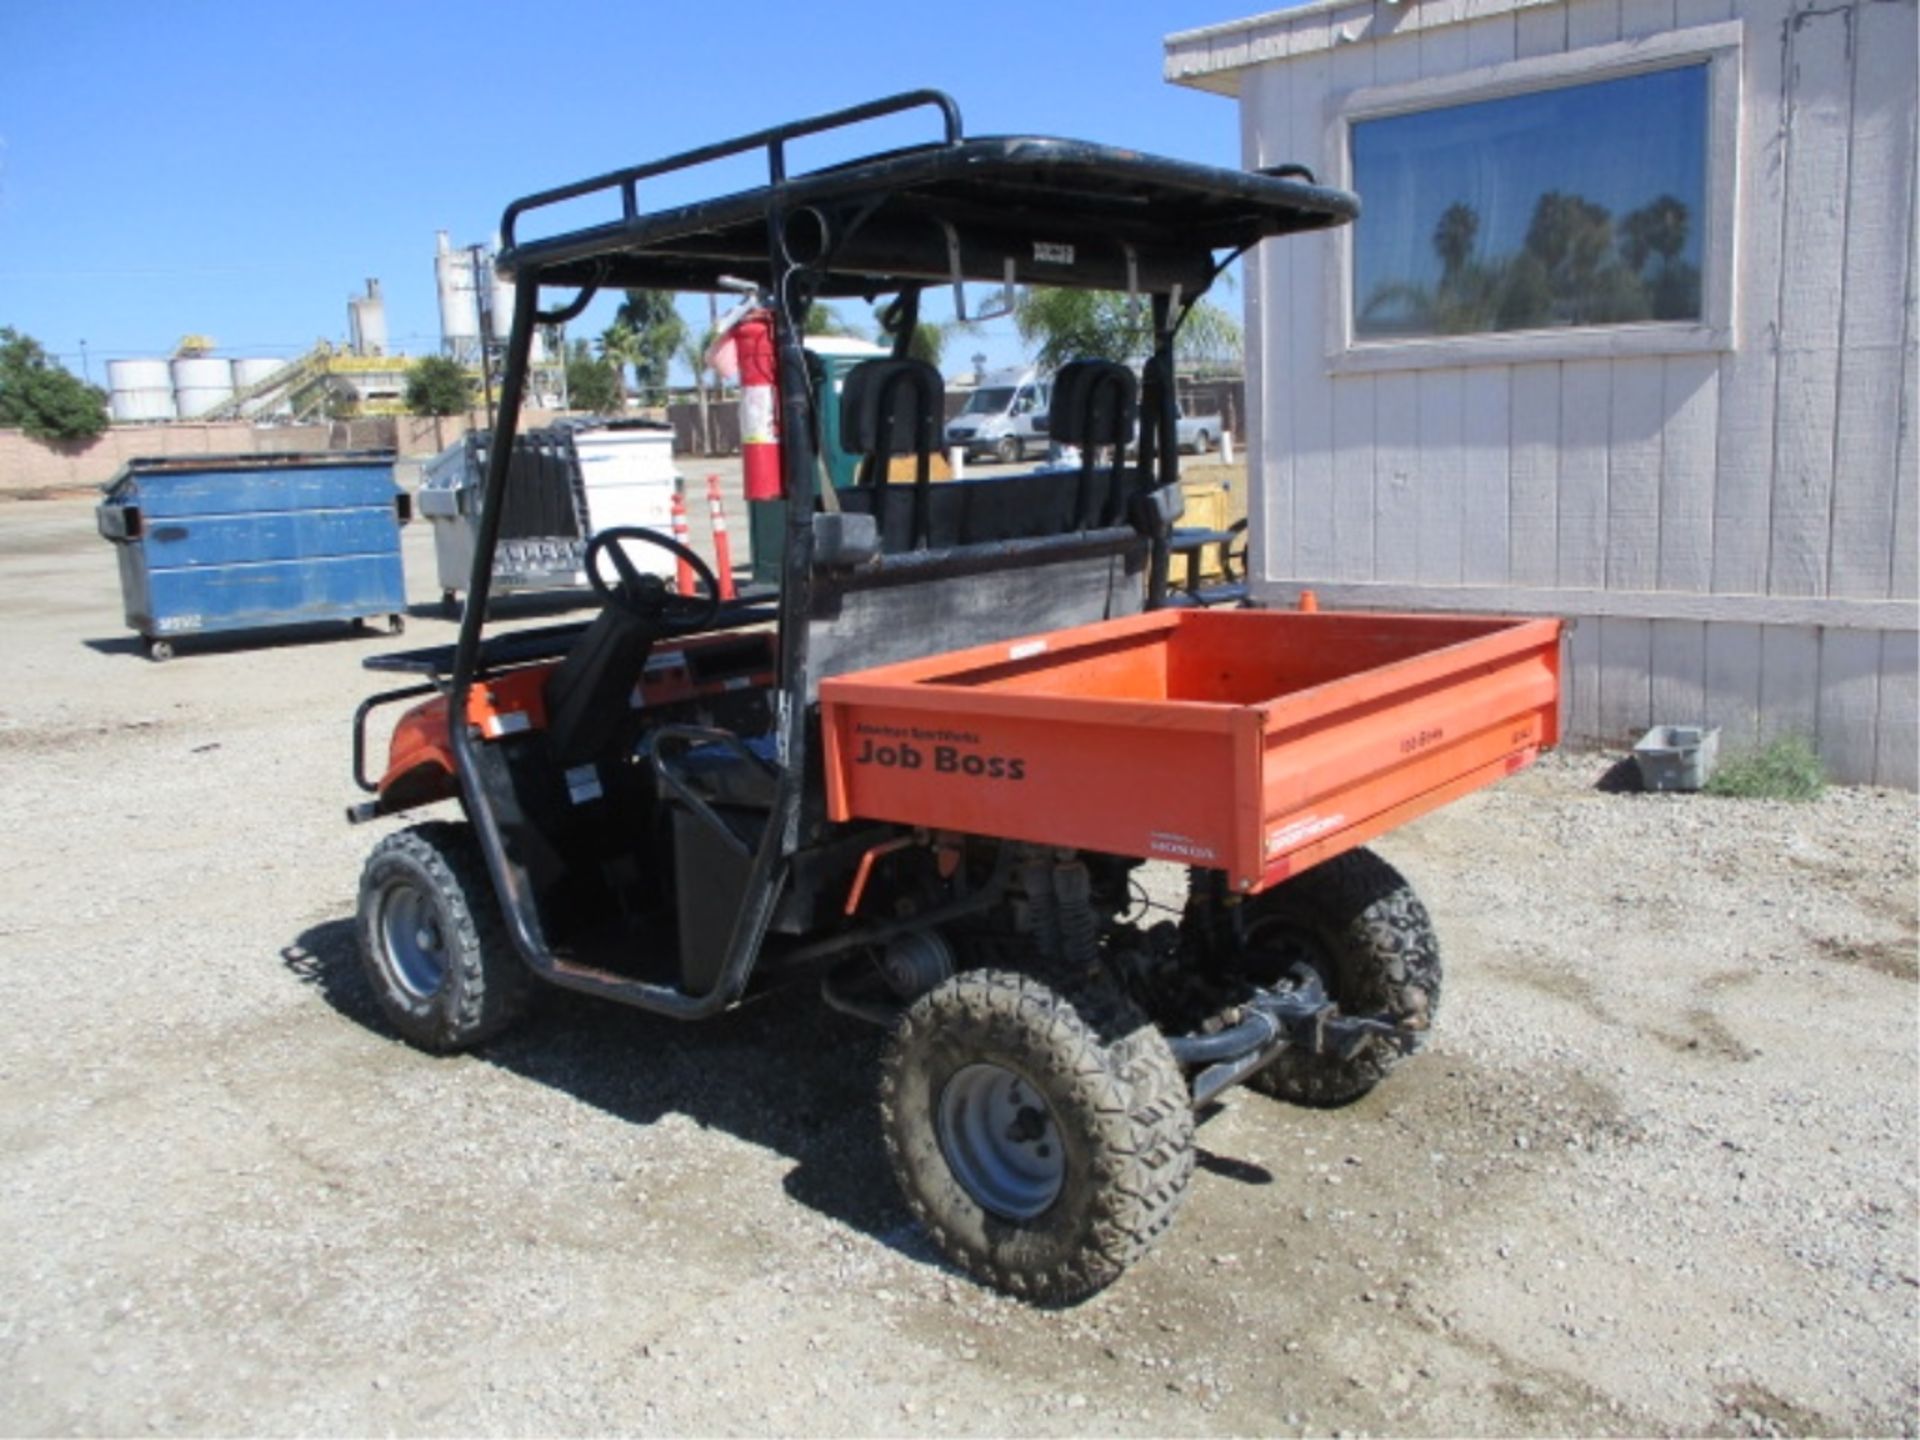 2008 American Sportworks Job Boss Utility Cart, Honda Gas, Rear Metal Dump Bed, Canopy, Tow Hitch, - Image 20 of 50